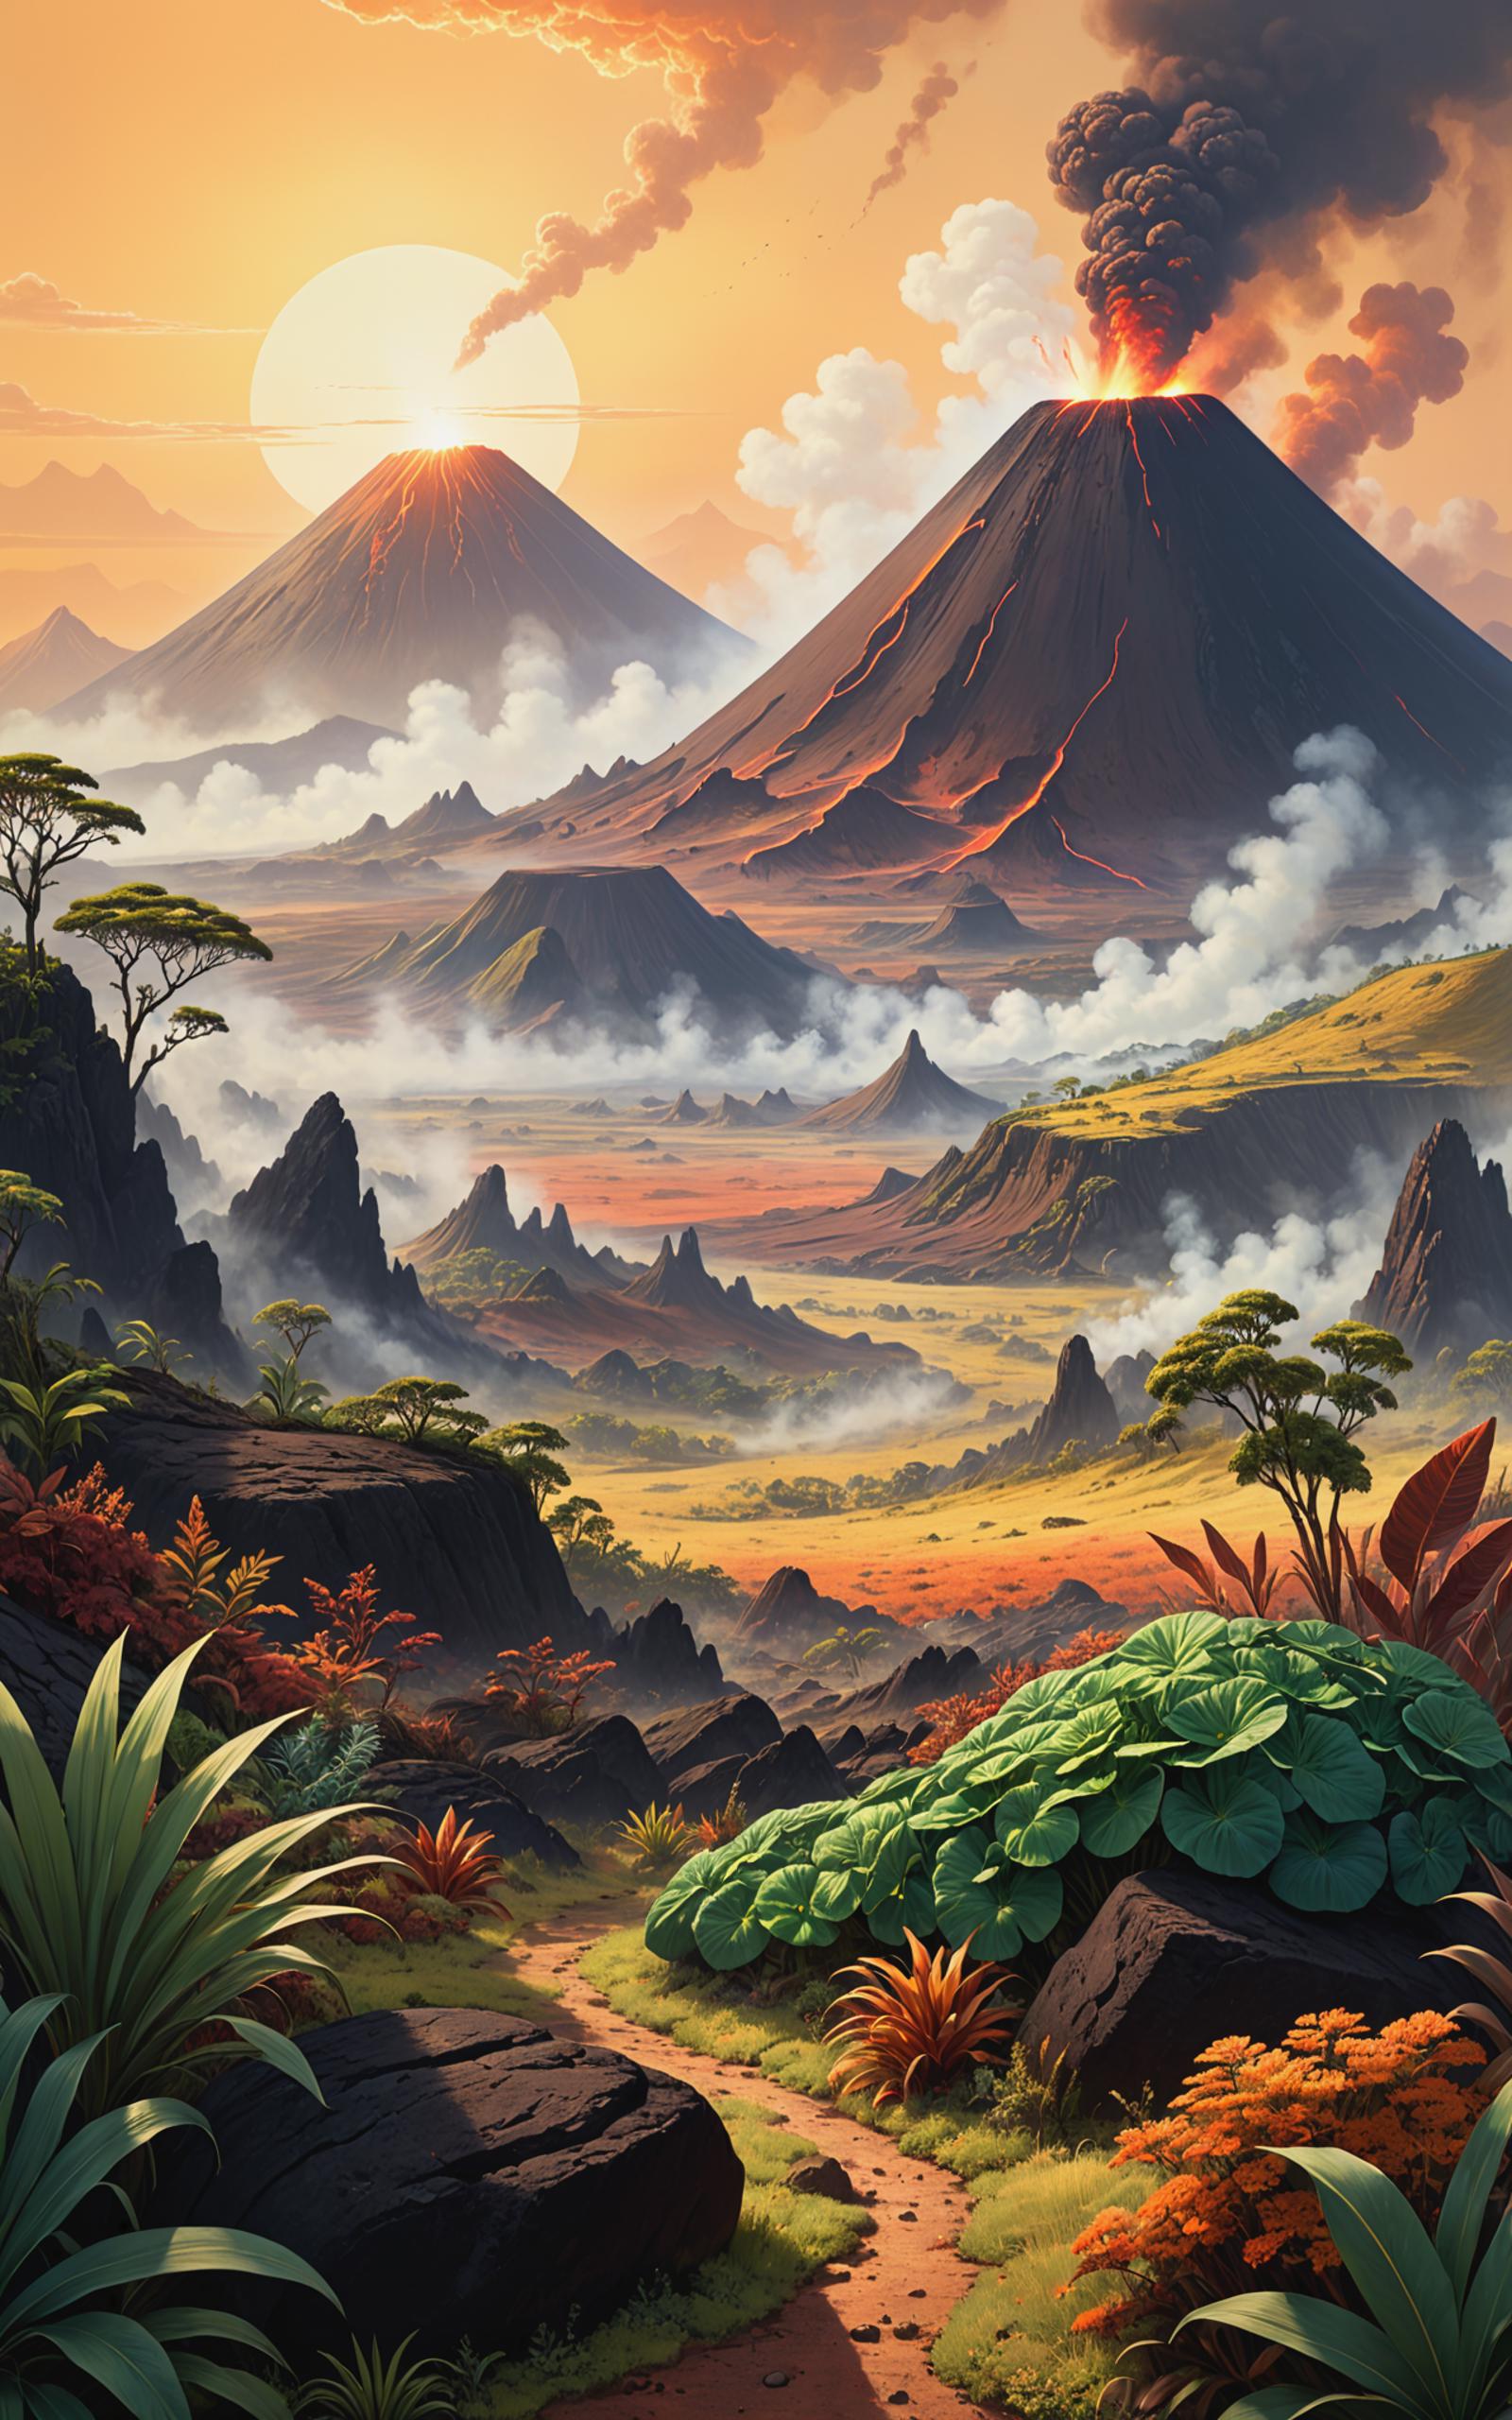 An Artistic Painting of a Mountainous Landscape with Trees and Plants.